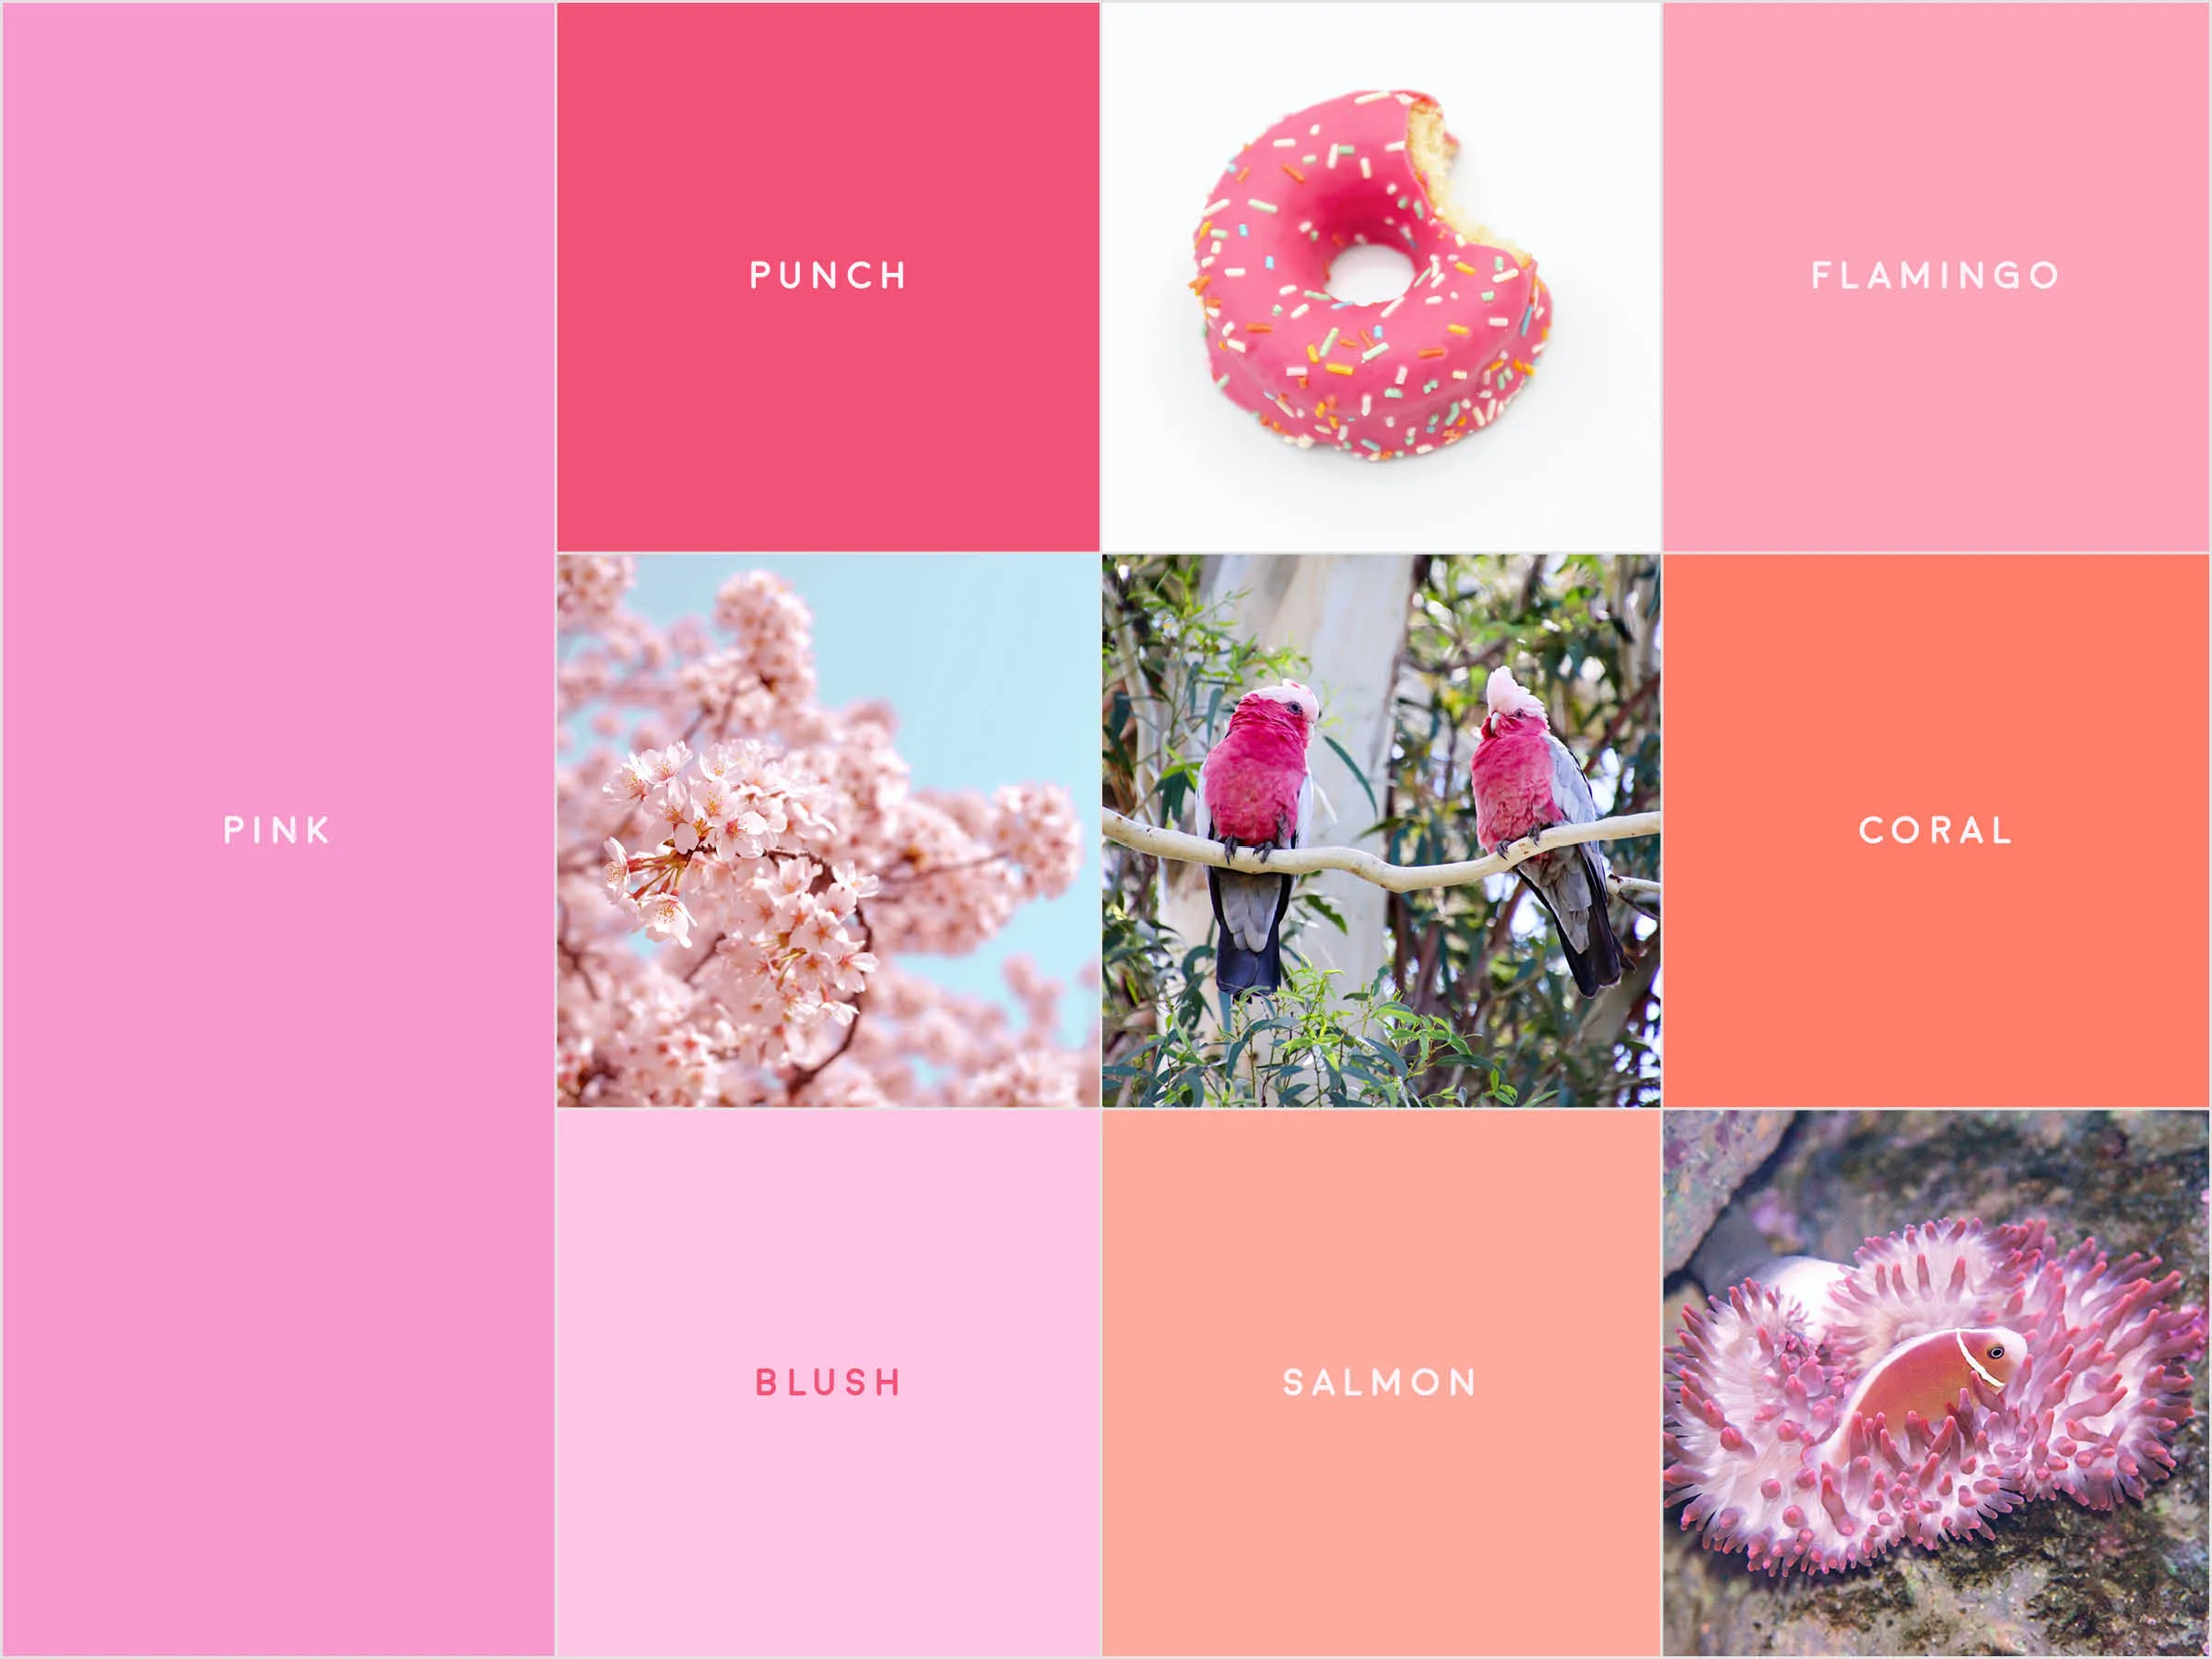 A gridded image with various tones of pink, with small photographs of a doughnut, cherry blossoms, parrots, and coral